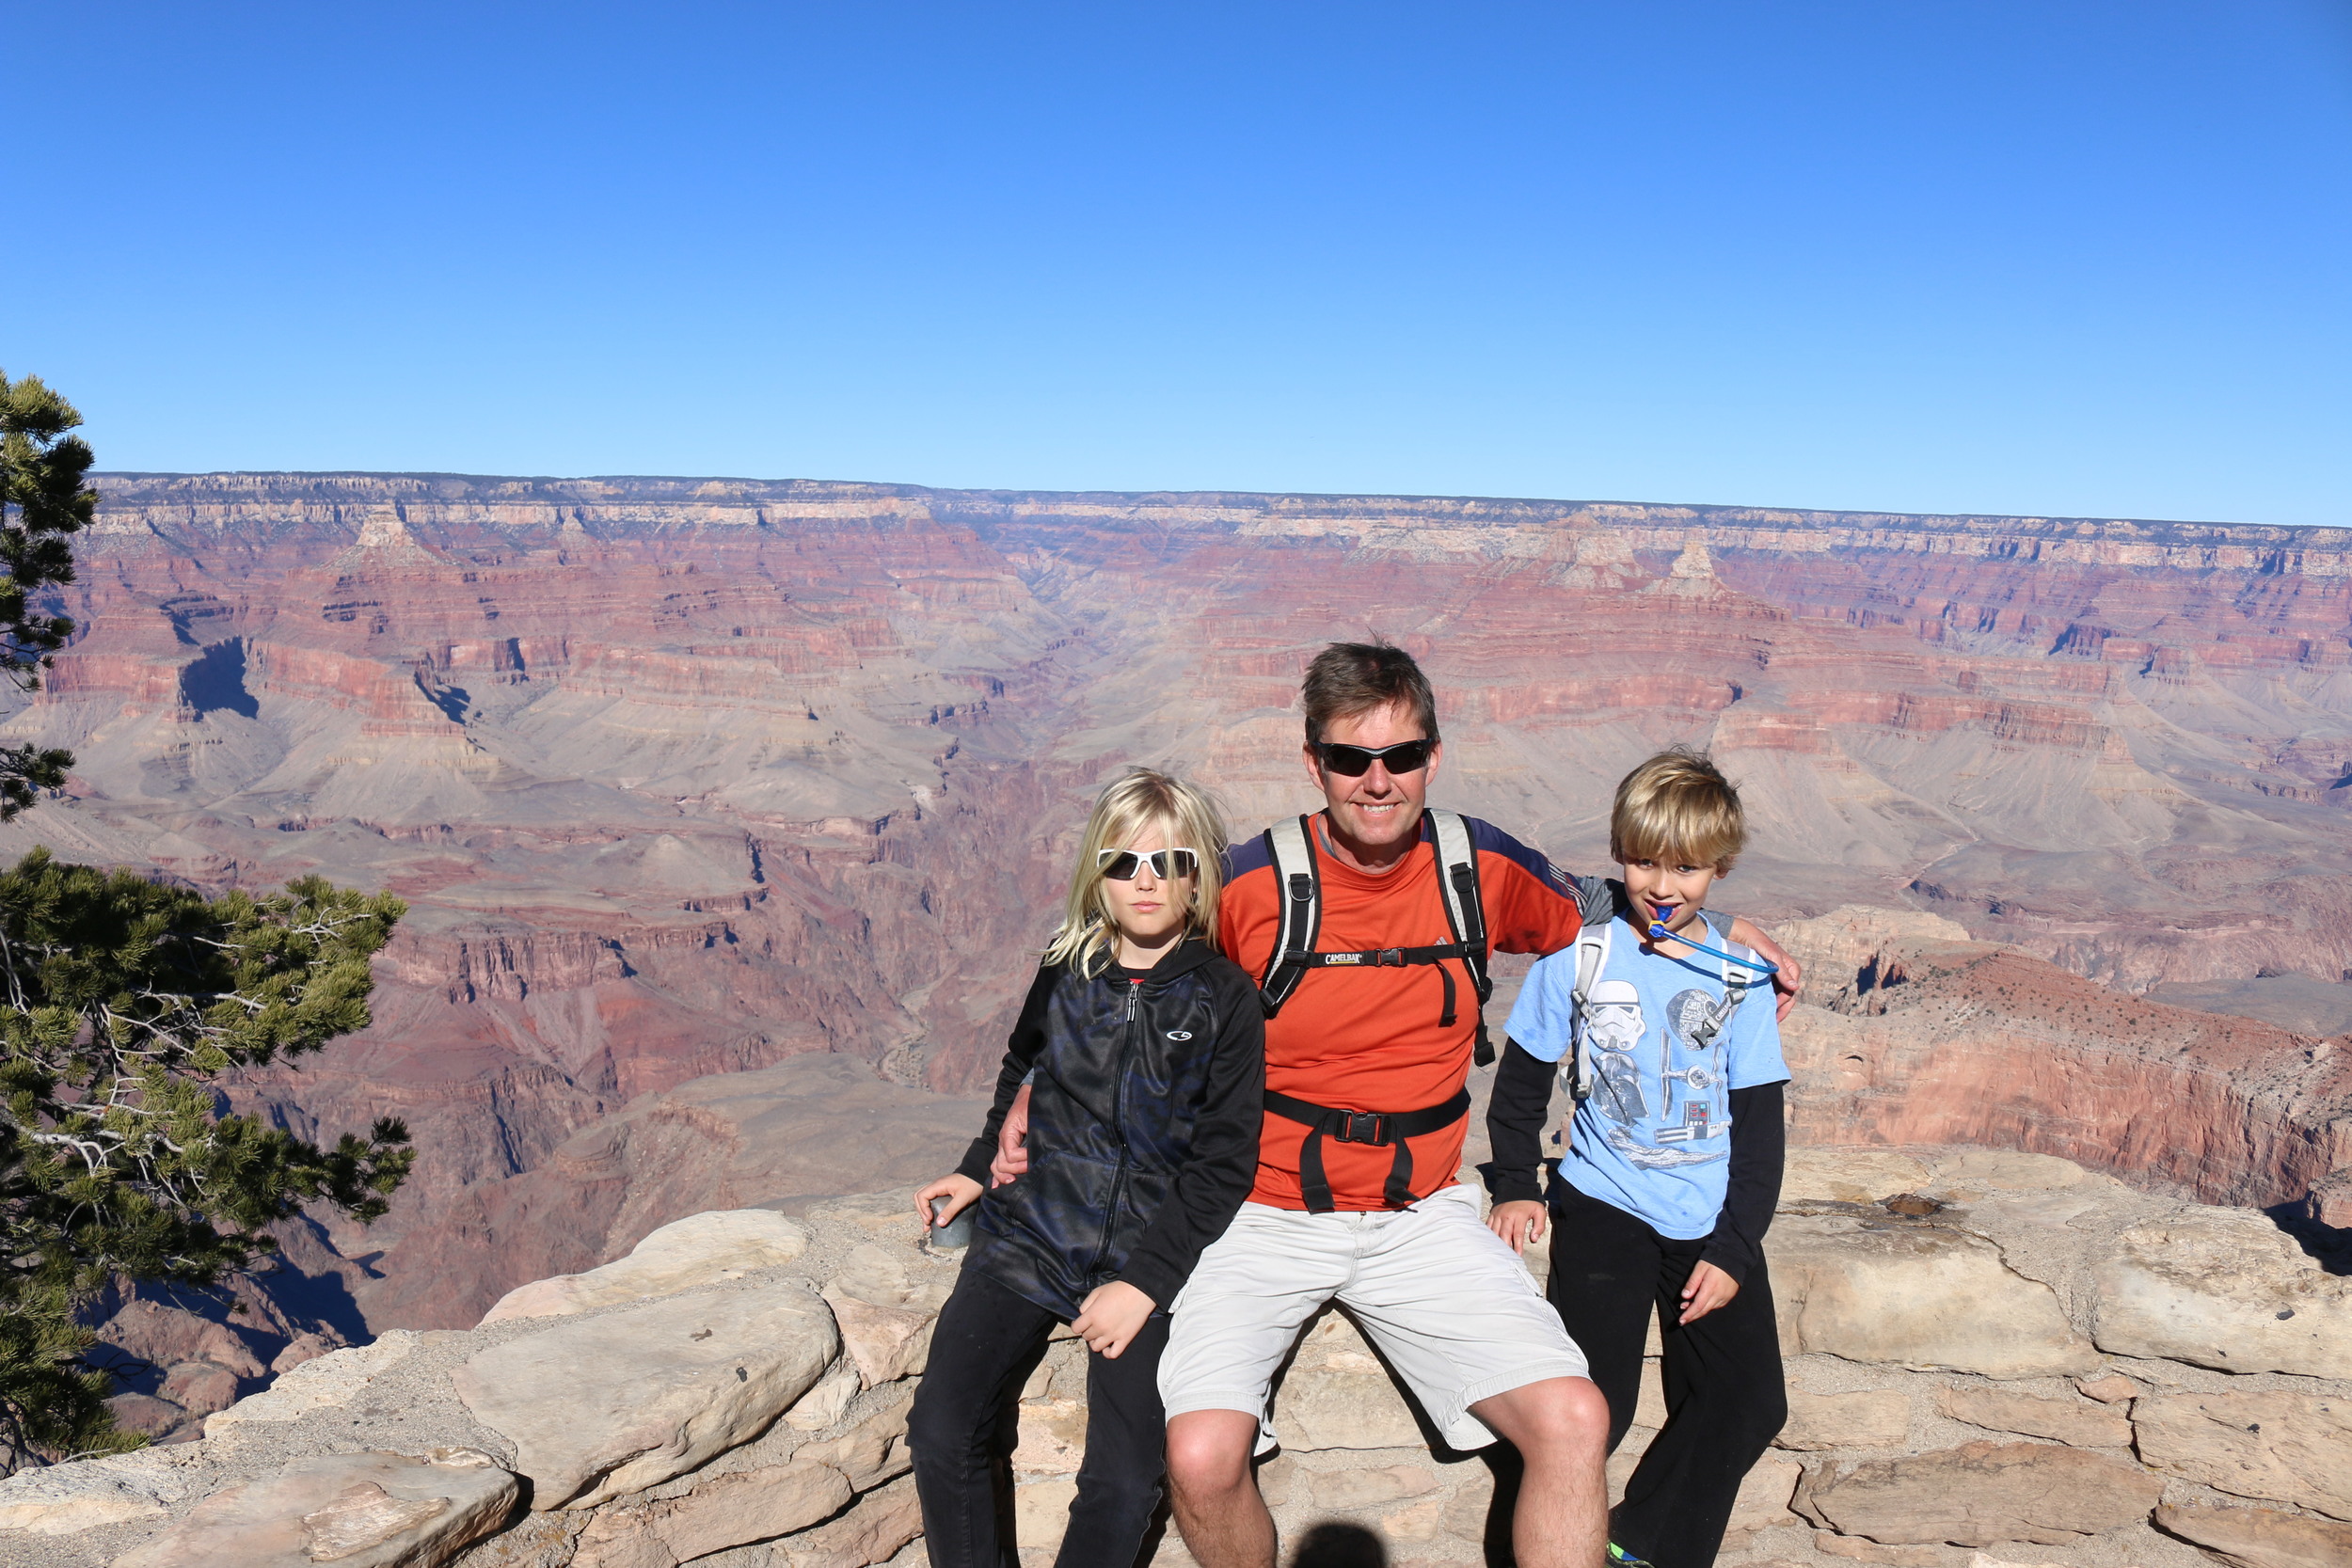 Grand Canyon NP: there's a vertical drop of about 1000' right behind us.